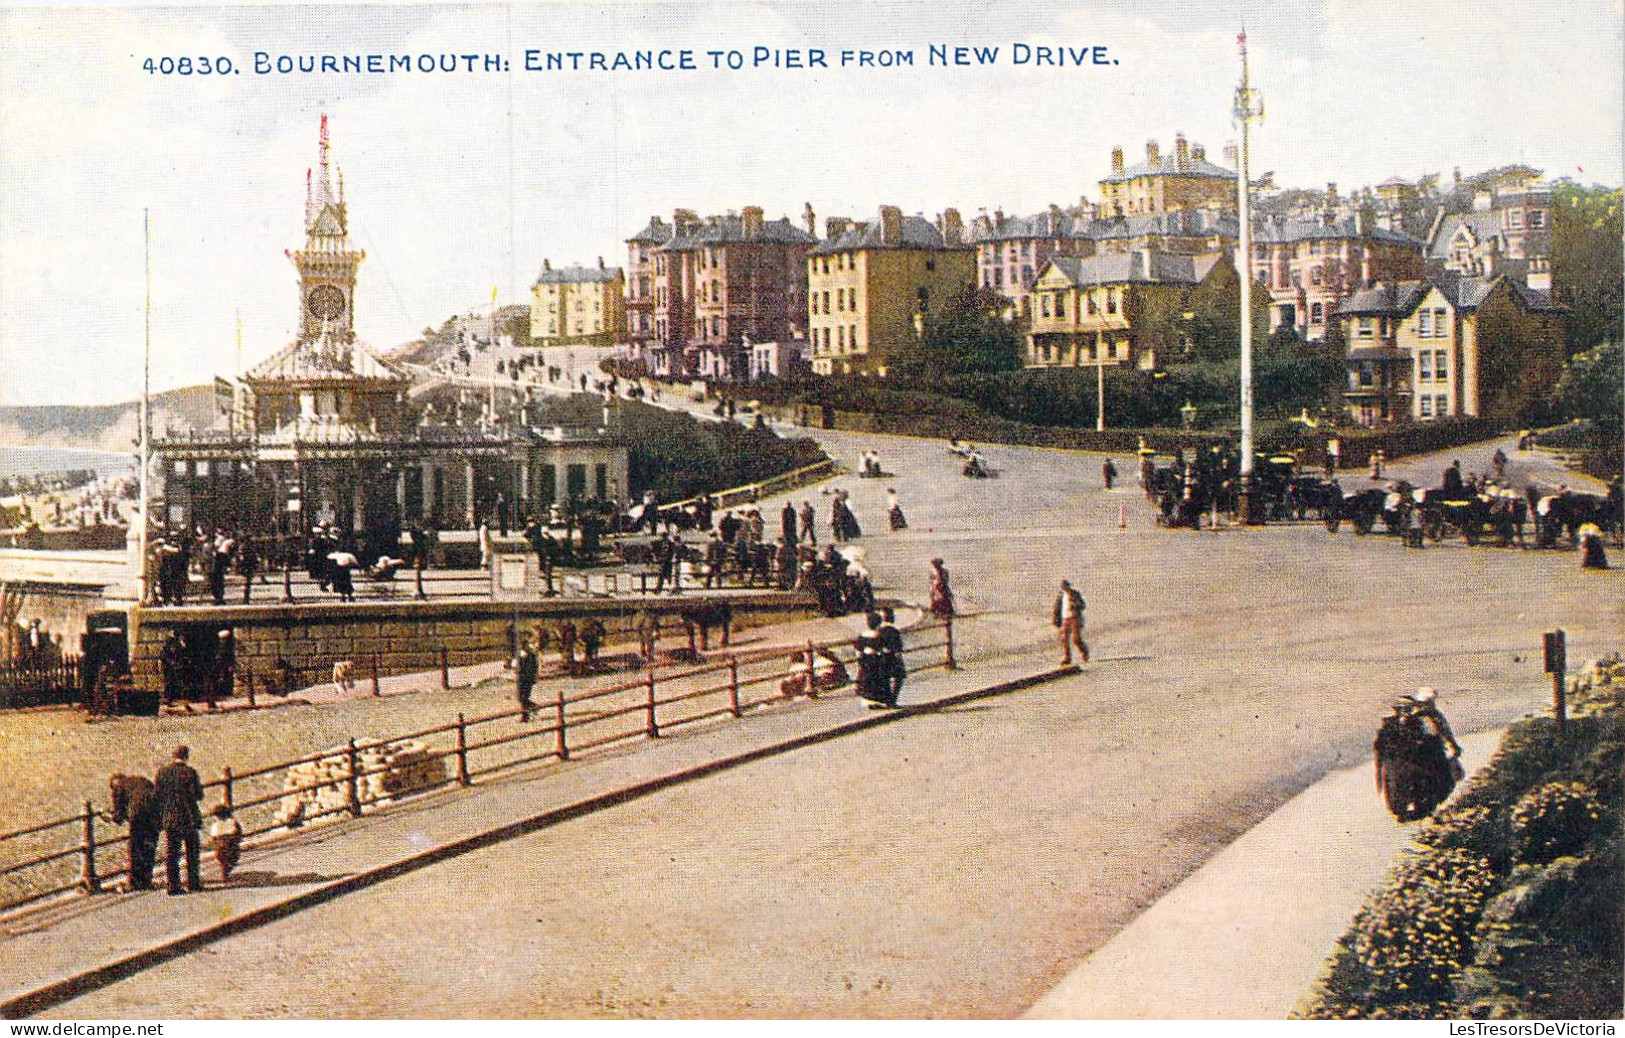 ANGLETERRE - Bournemouth - Entrance To Pier From New Drive - Carte Postale Ancienne - Bournemouth (depuis 1972)